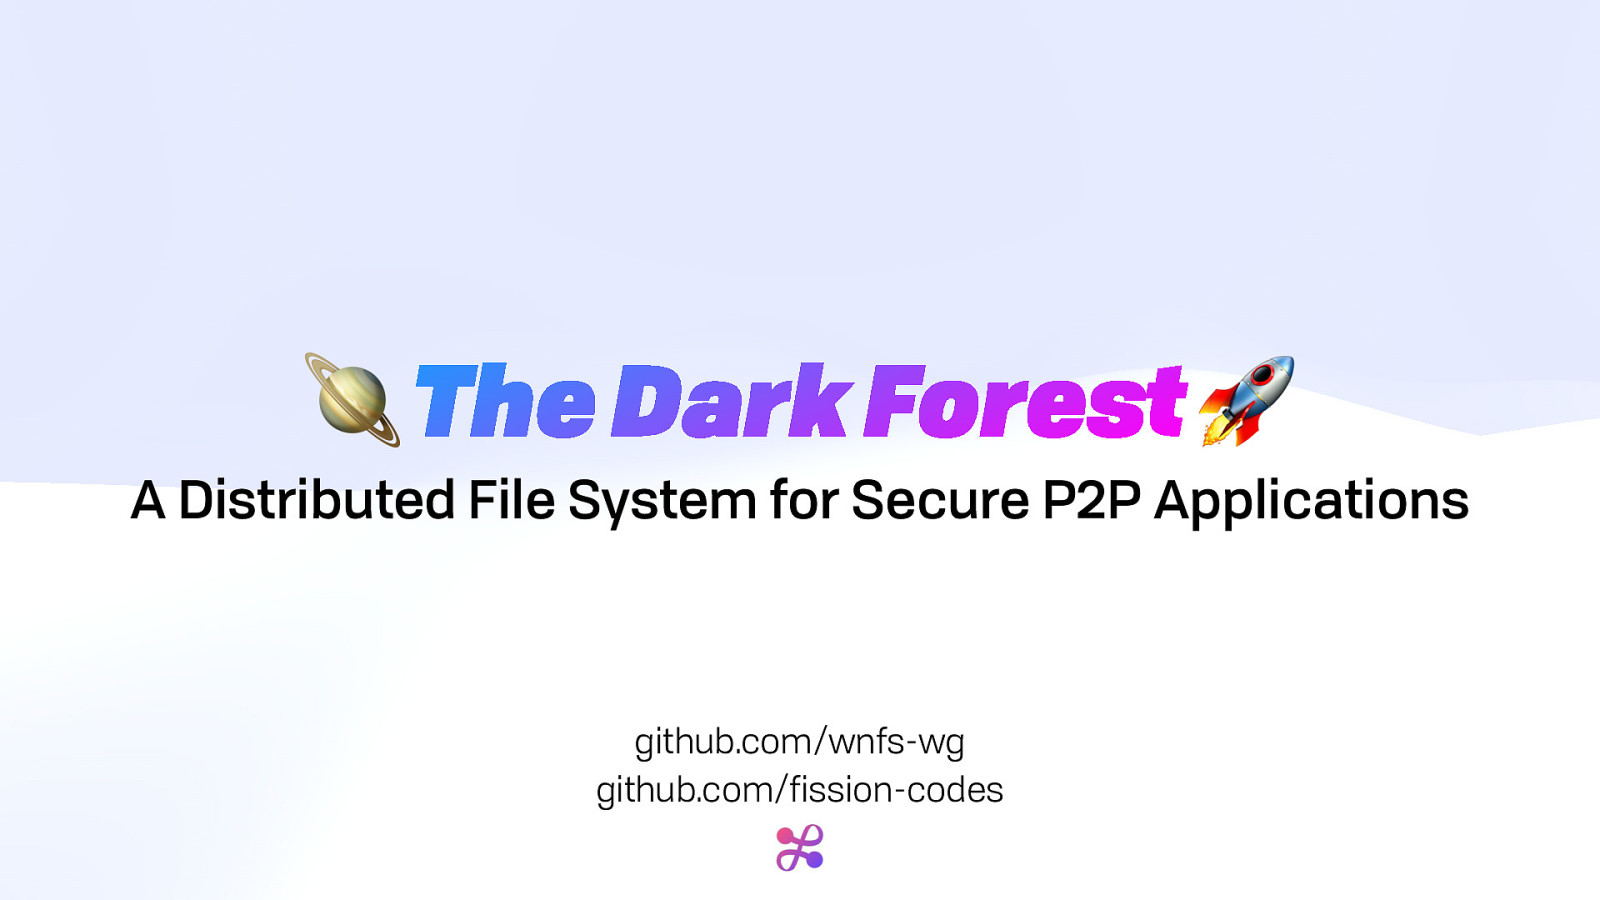 The Dark Forest: A Distributed File System for P2P Applications